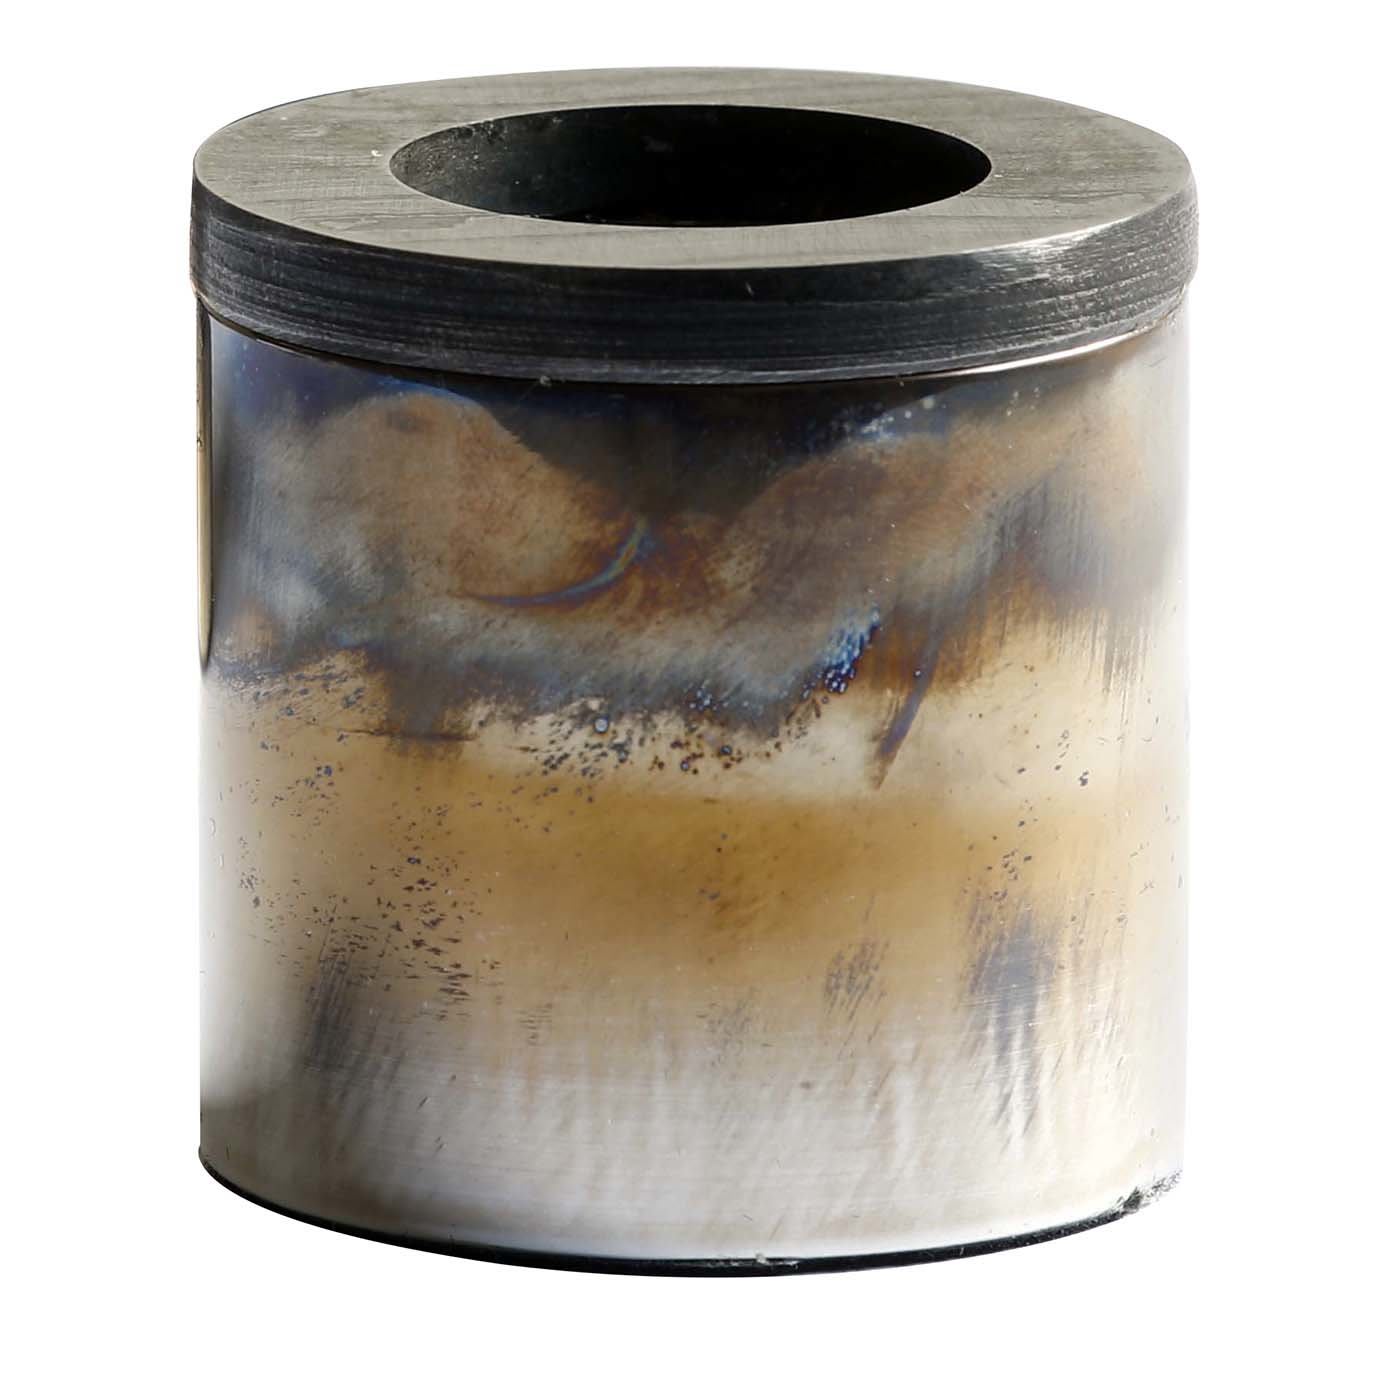 Damascus Stainless Steel Candle Holder - Dal Furlo